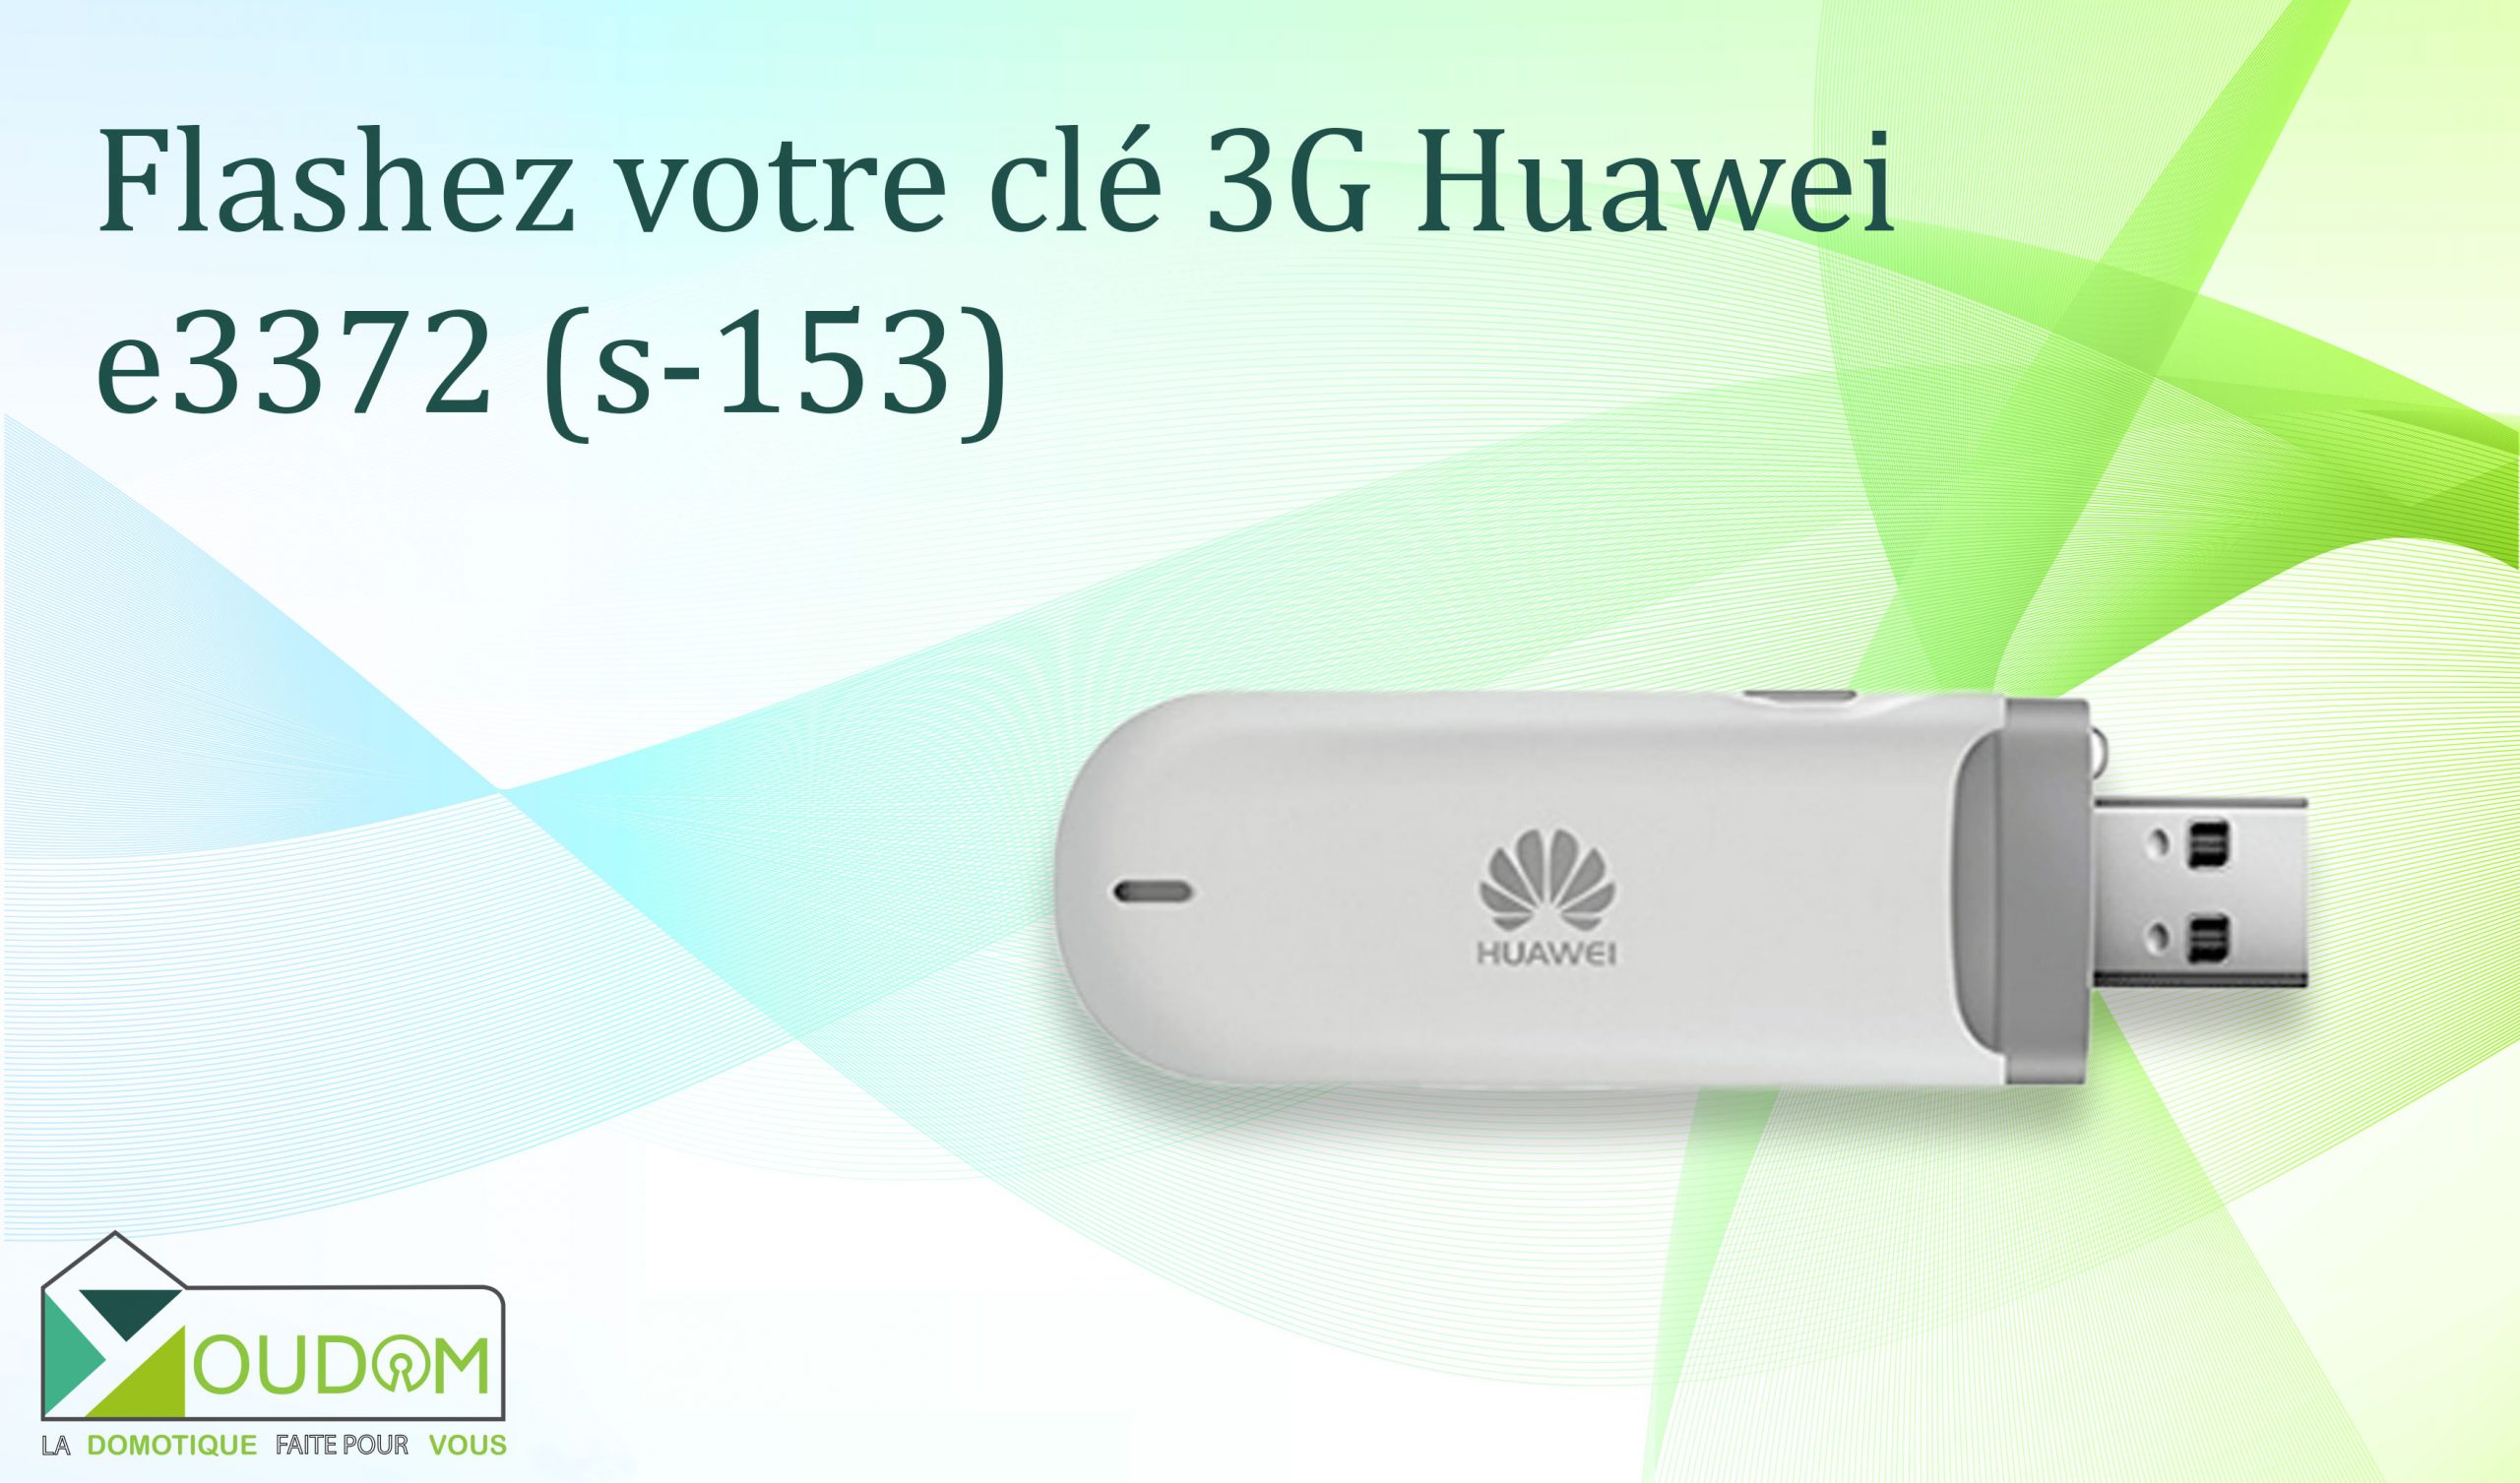 You are currently viewing Flashez votre clé 3G Huawei e3372 (s-153)